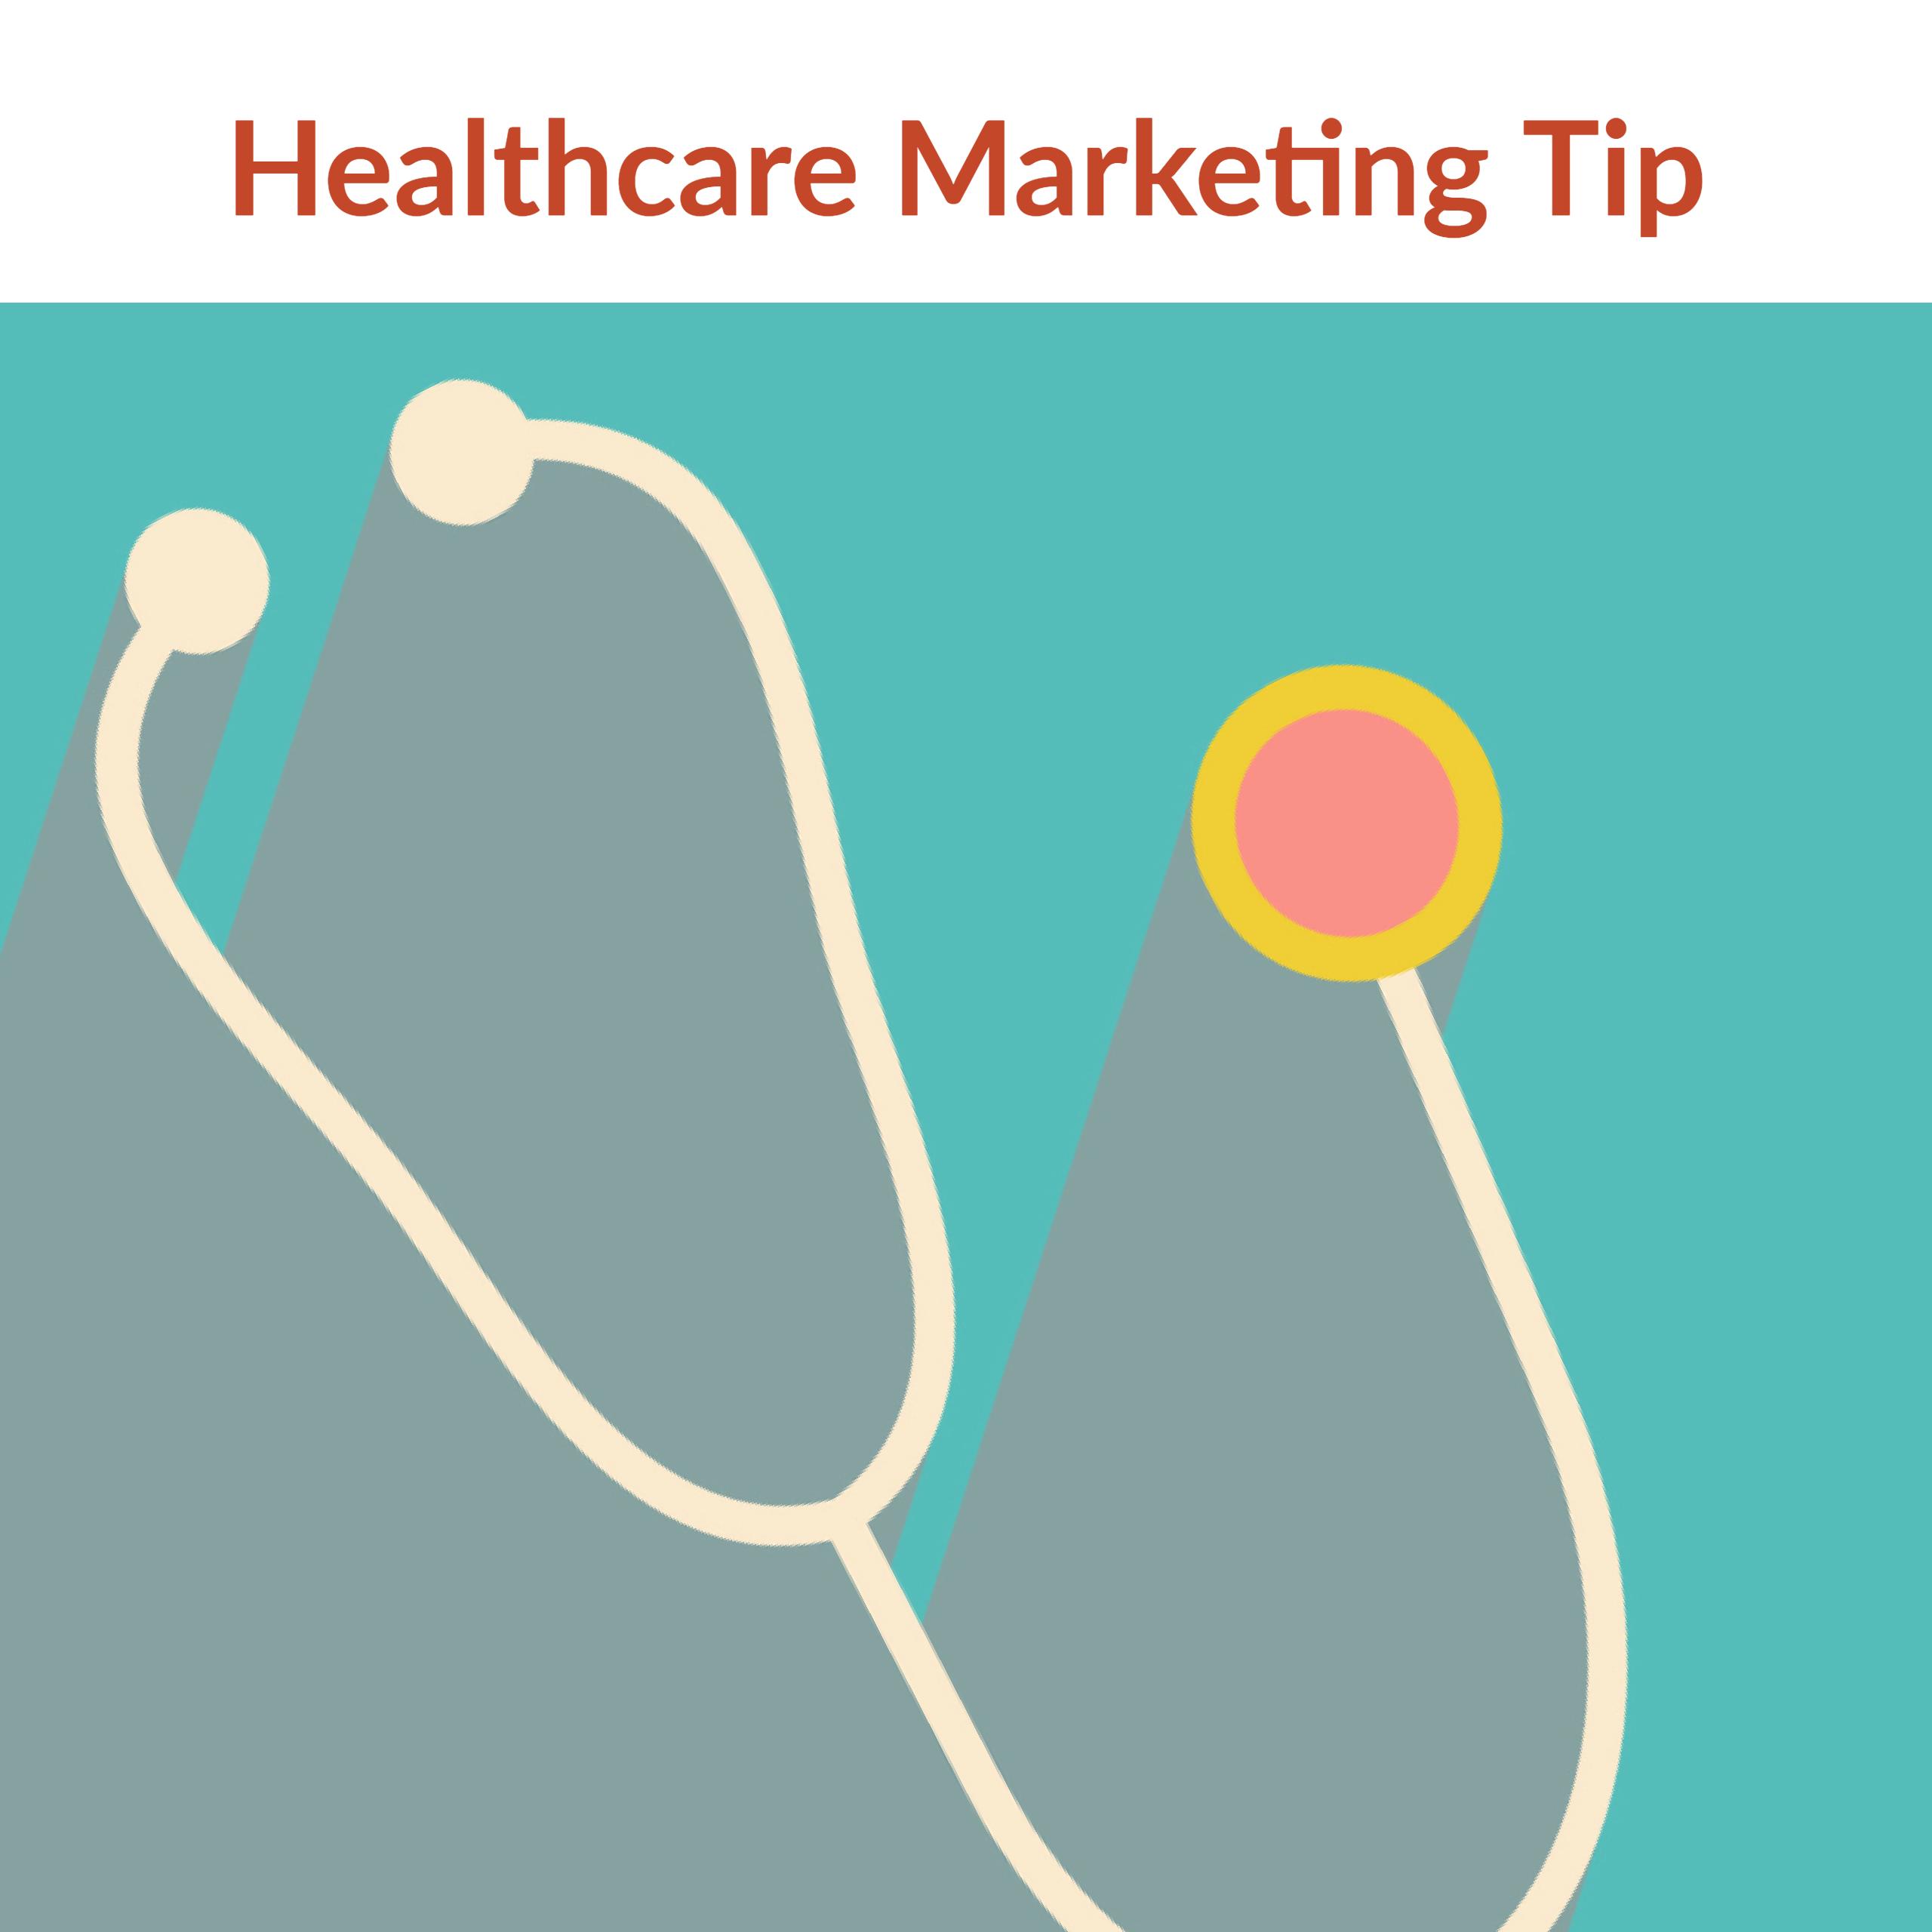 Specialty Healthcare Providers CAN Use Social Media Marketing